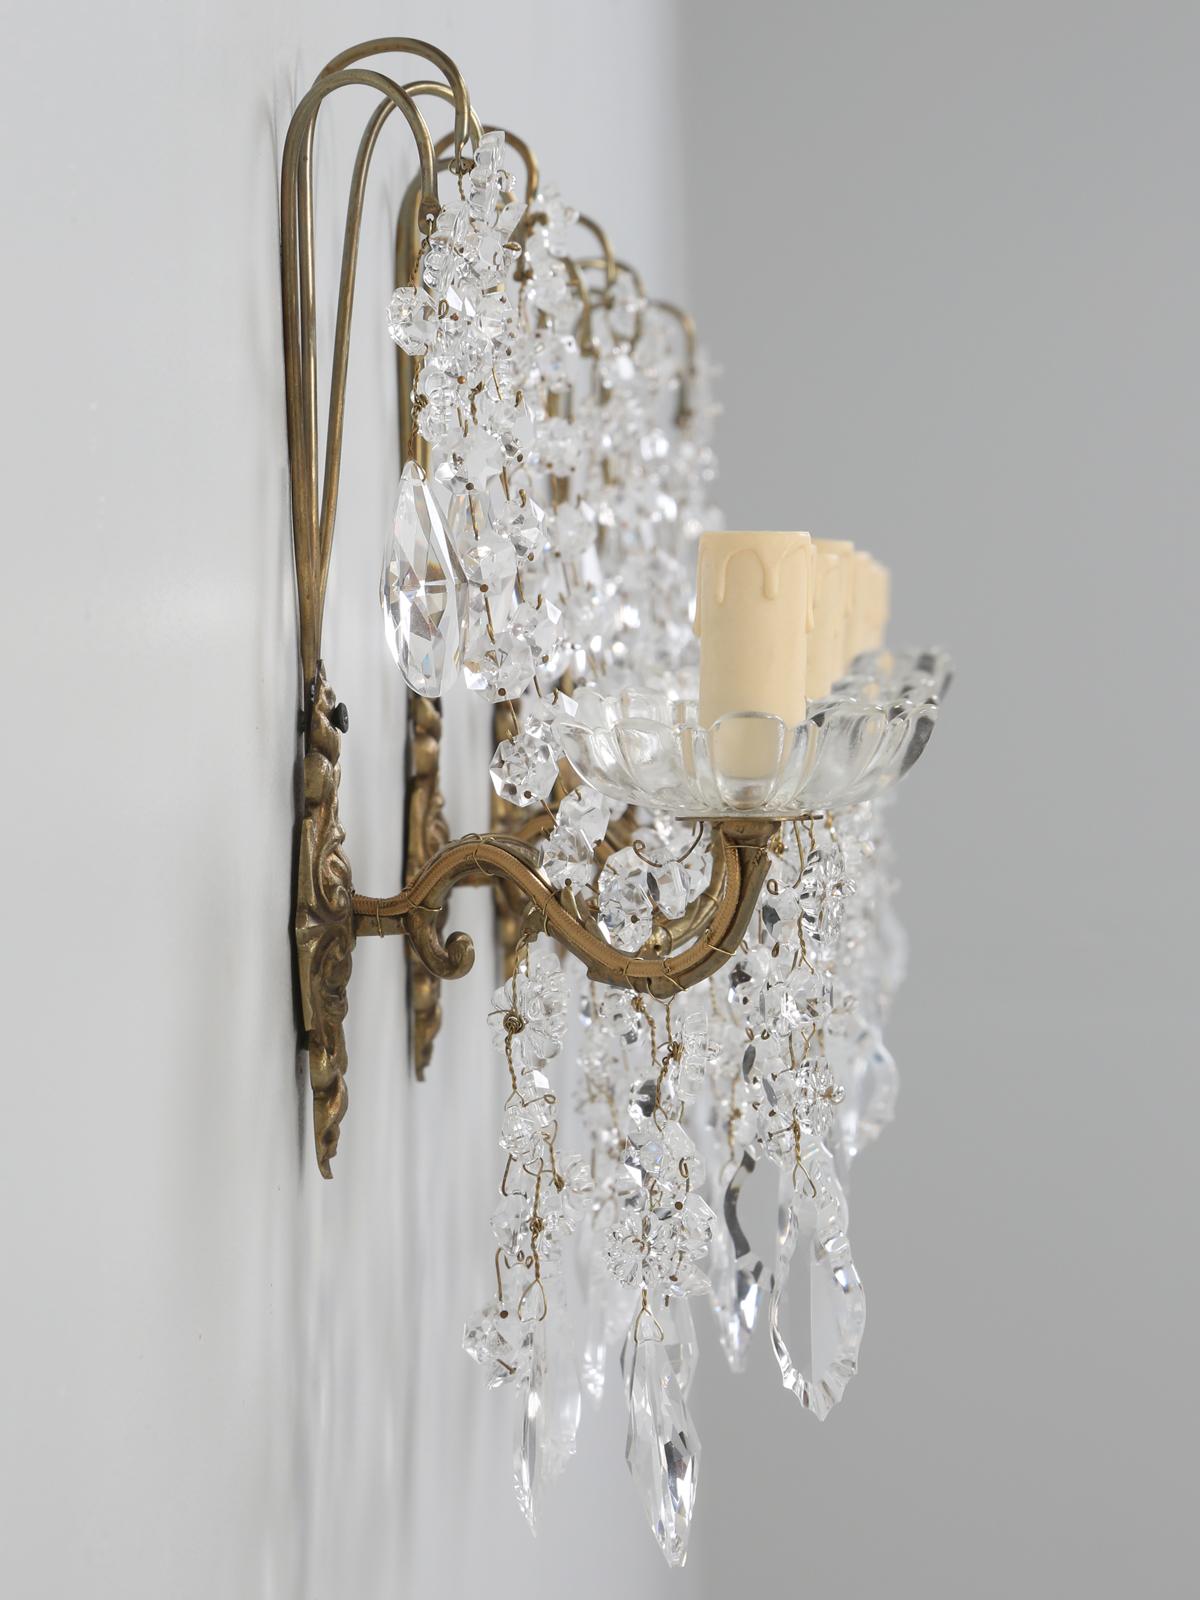 Hand-Crafted French Crystal and Brass 2-Light Sconces, Available Individually or in Pairs